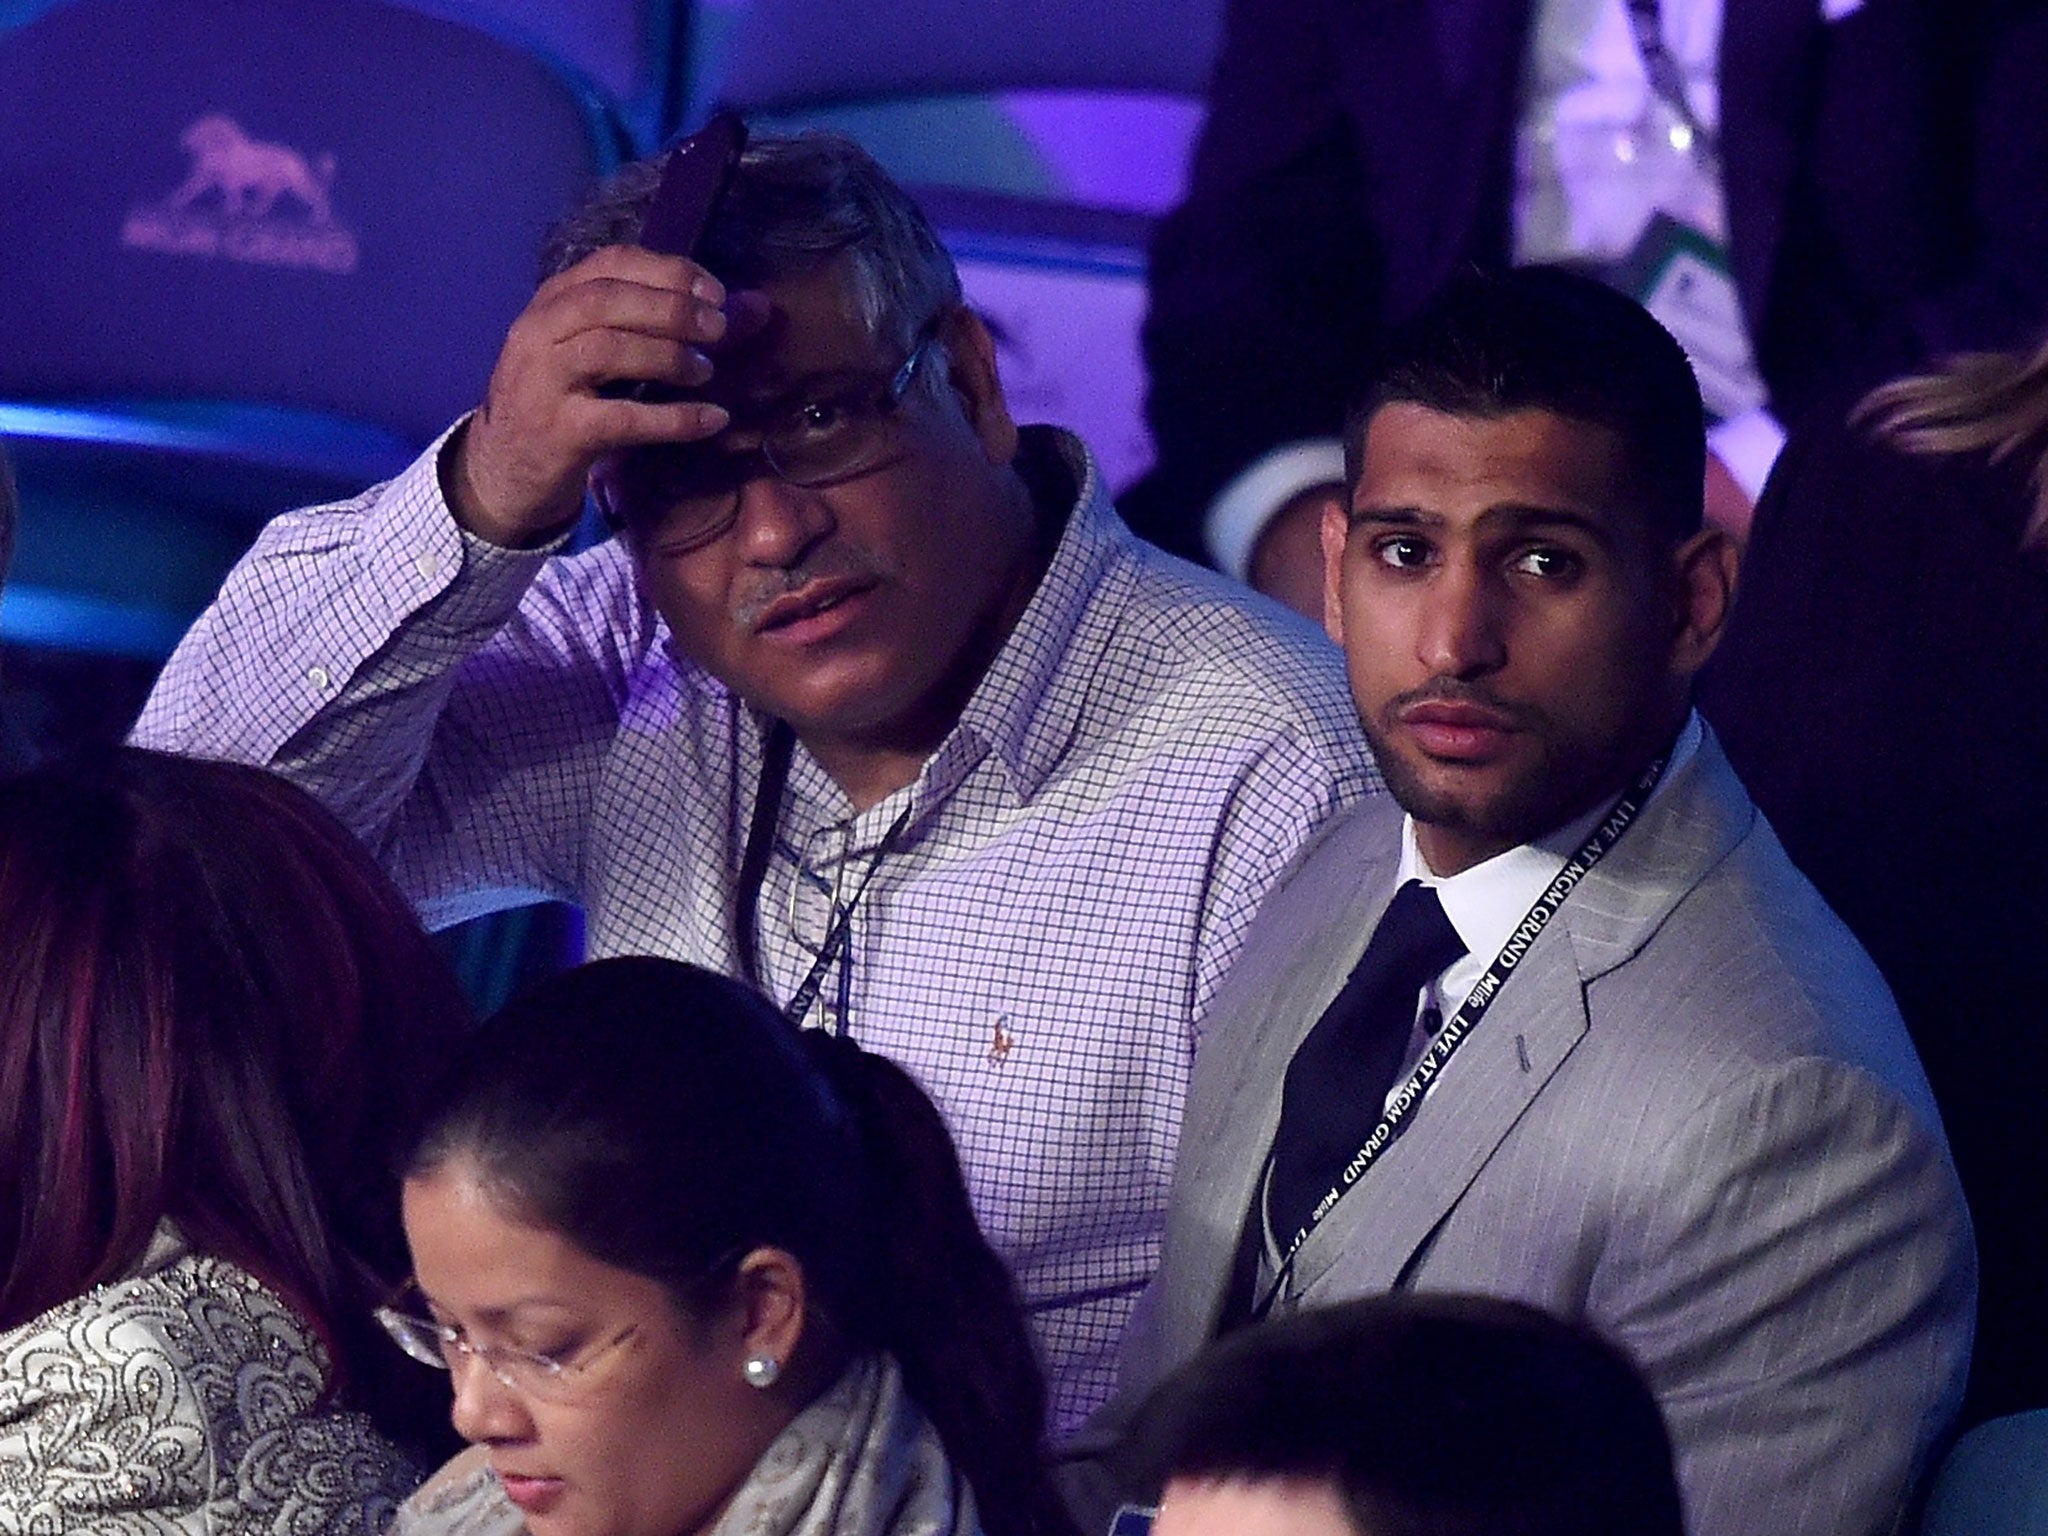 Amir Khan, ringside at the MGM in Las Vegas on Saturday, hopes to get a shot at Mayweather